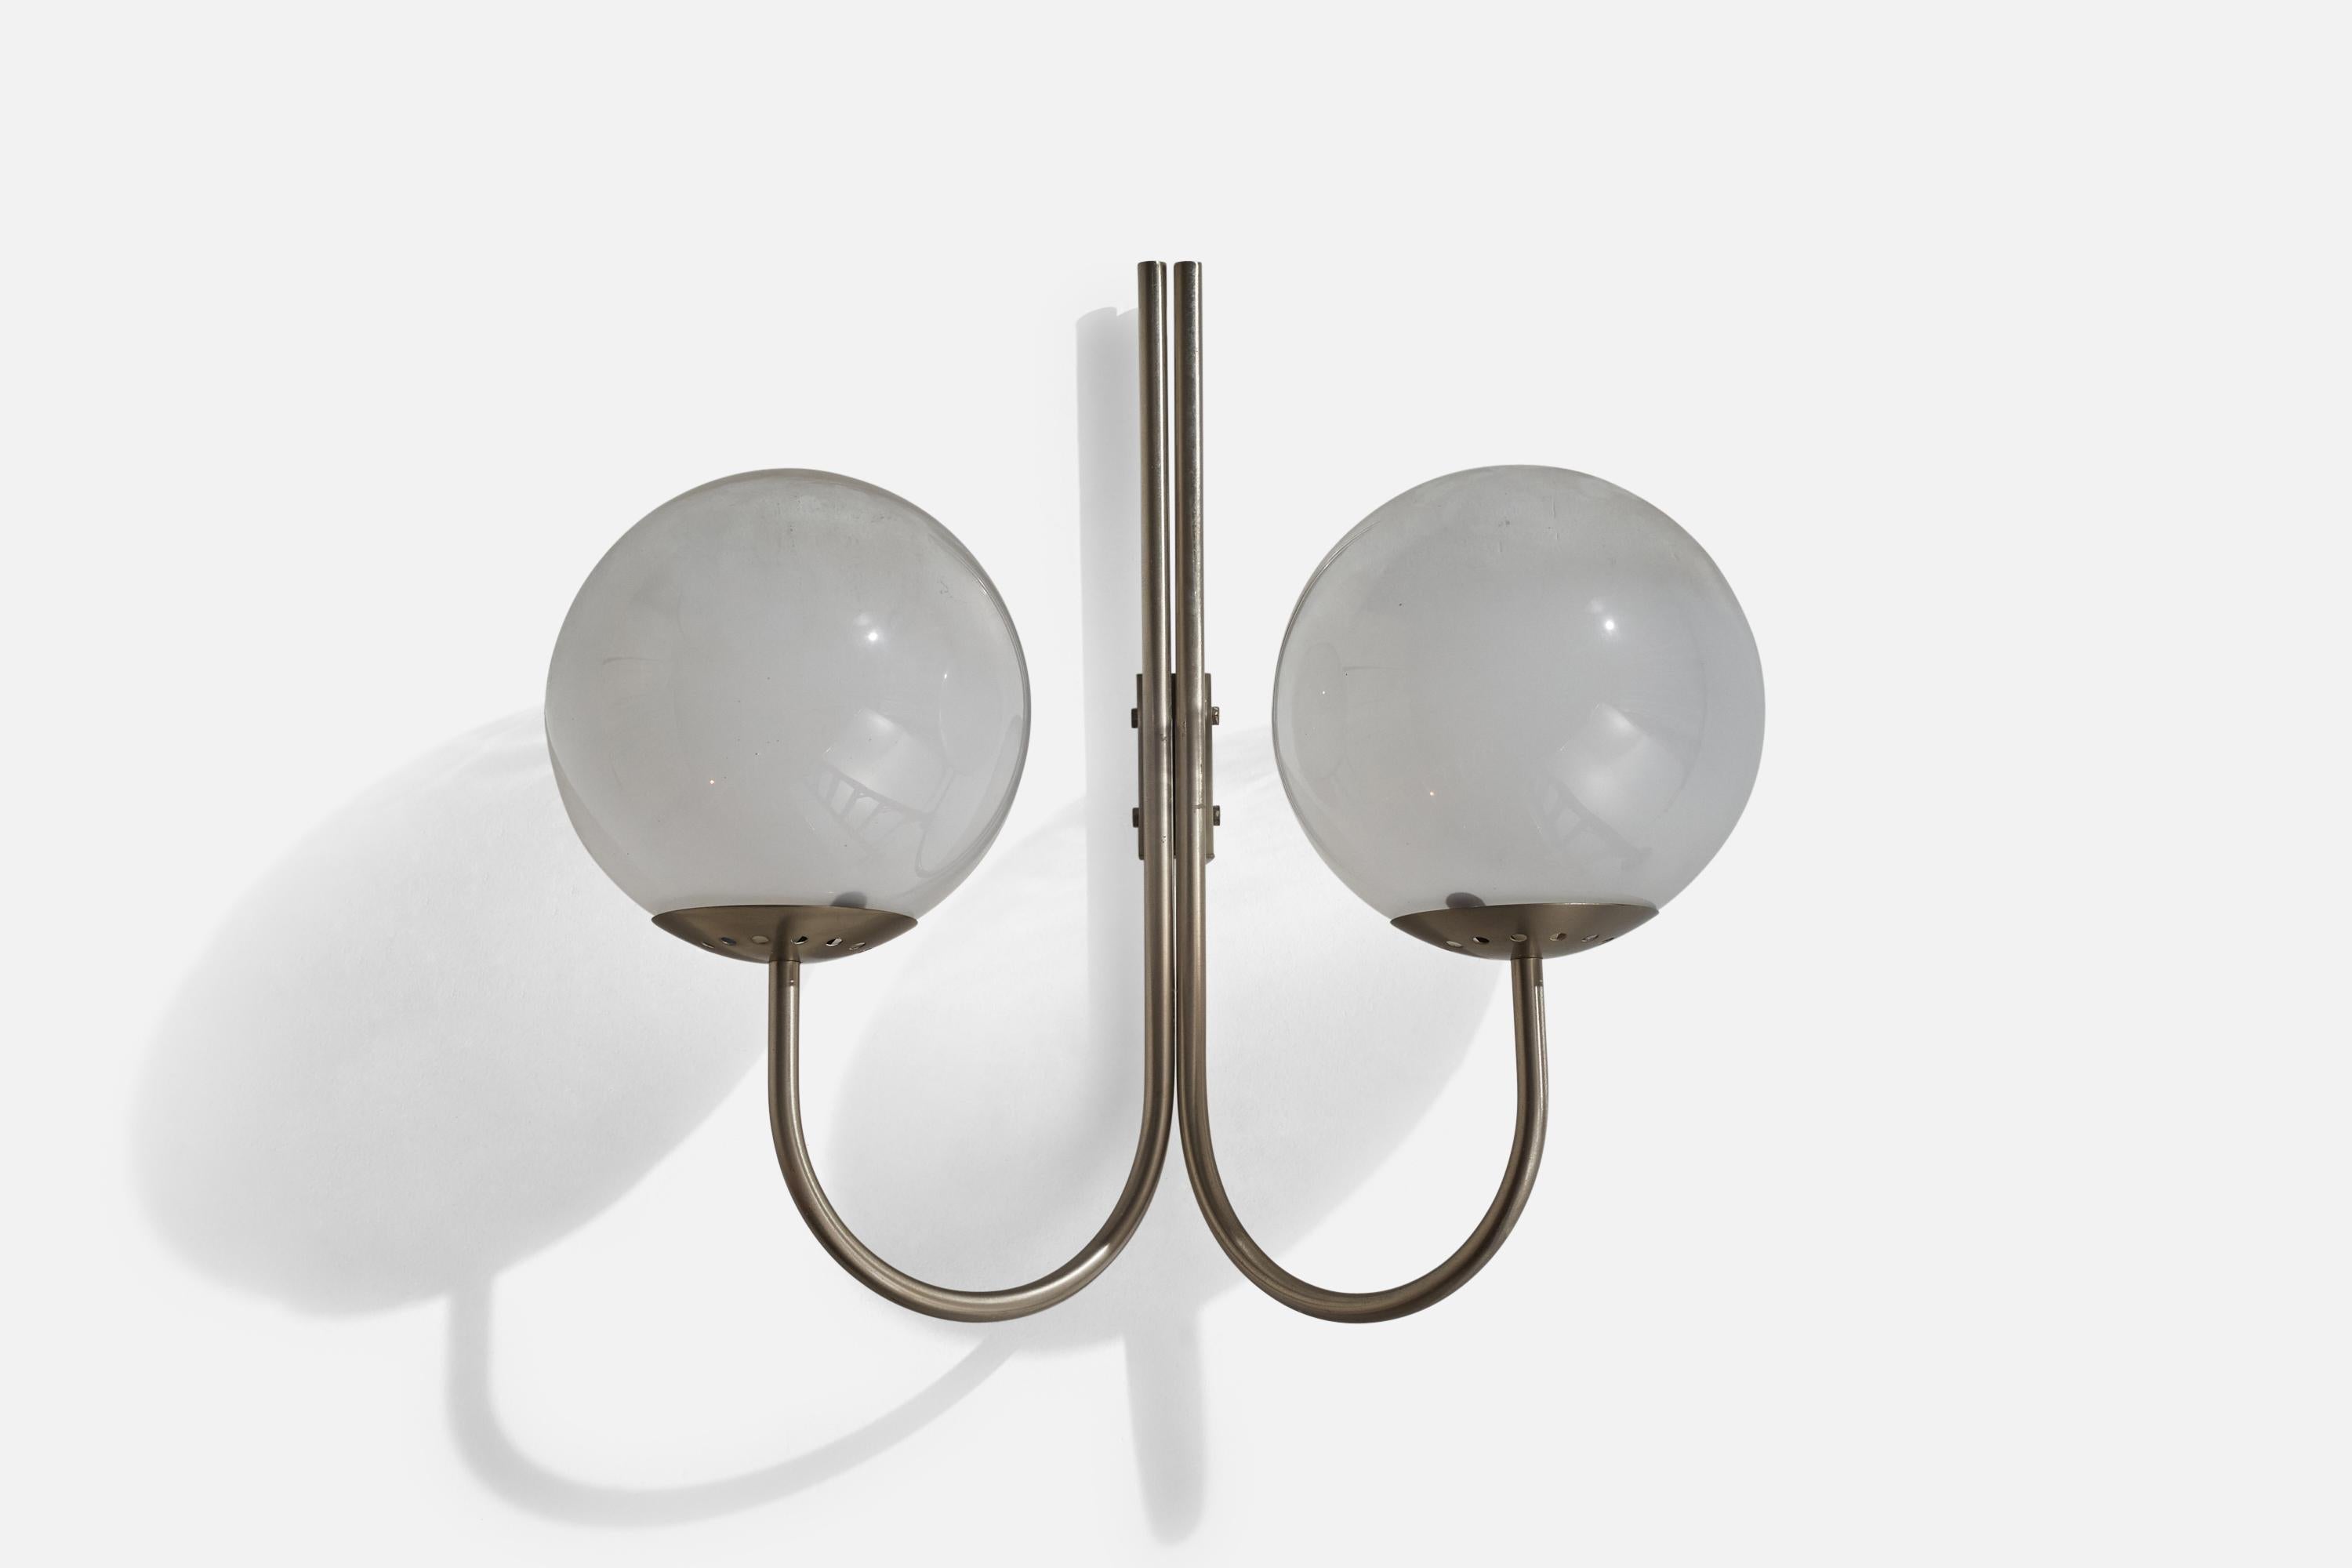 A two-armed nickel-plated braass and frosted glass wall light designed and produced in Italy, 1960s.

Overall Dimensions (inches): 23” H x 23”  W x 12” D
Back Plate Dimensions (inches): 4” H x 1.5”  W x .75” D
Bulb Specifications: E-26 Bulb
Number